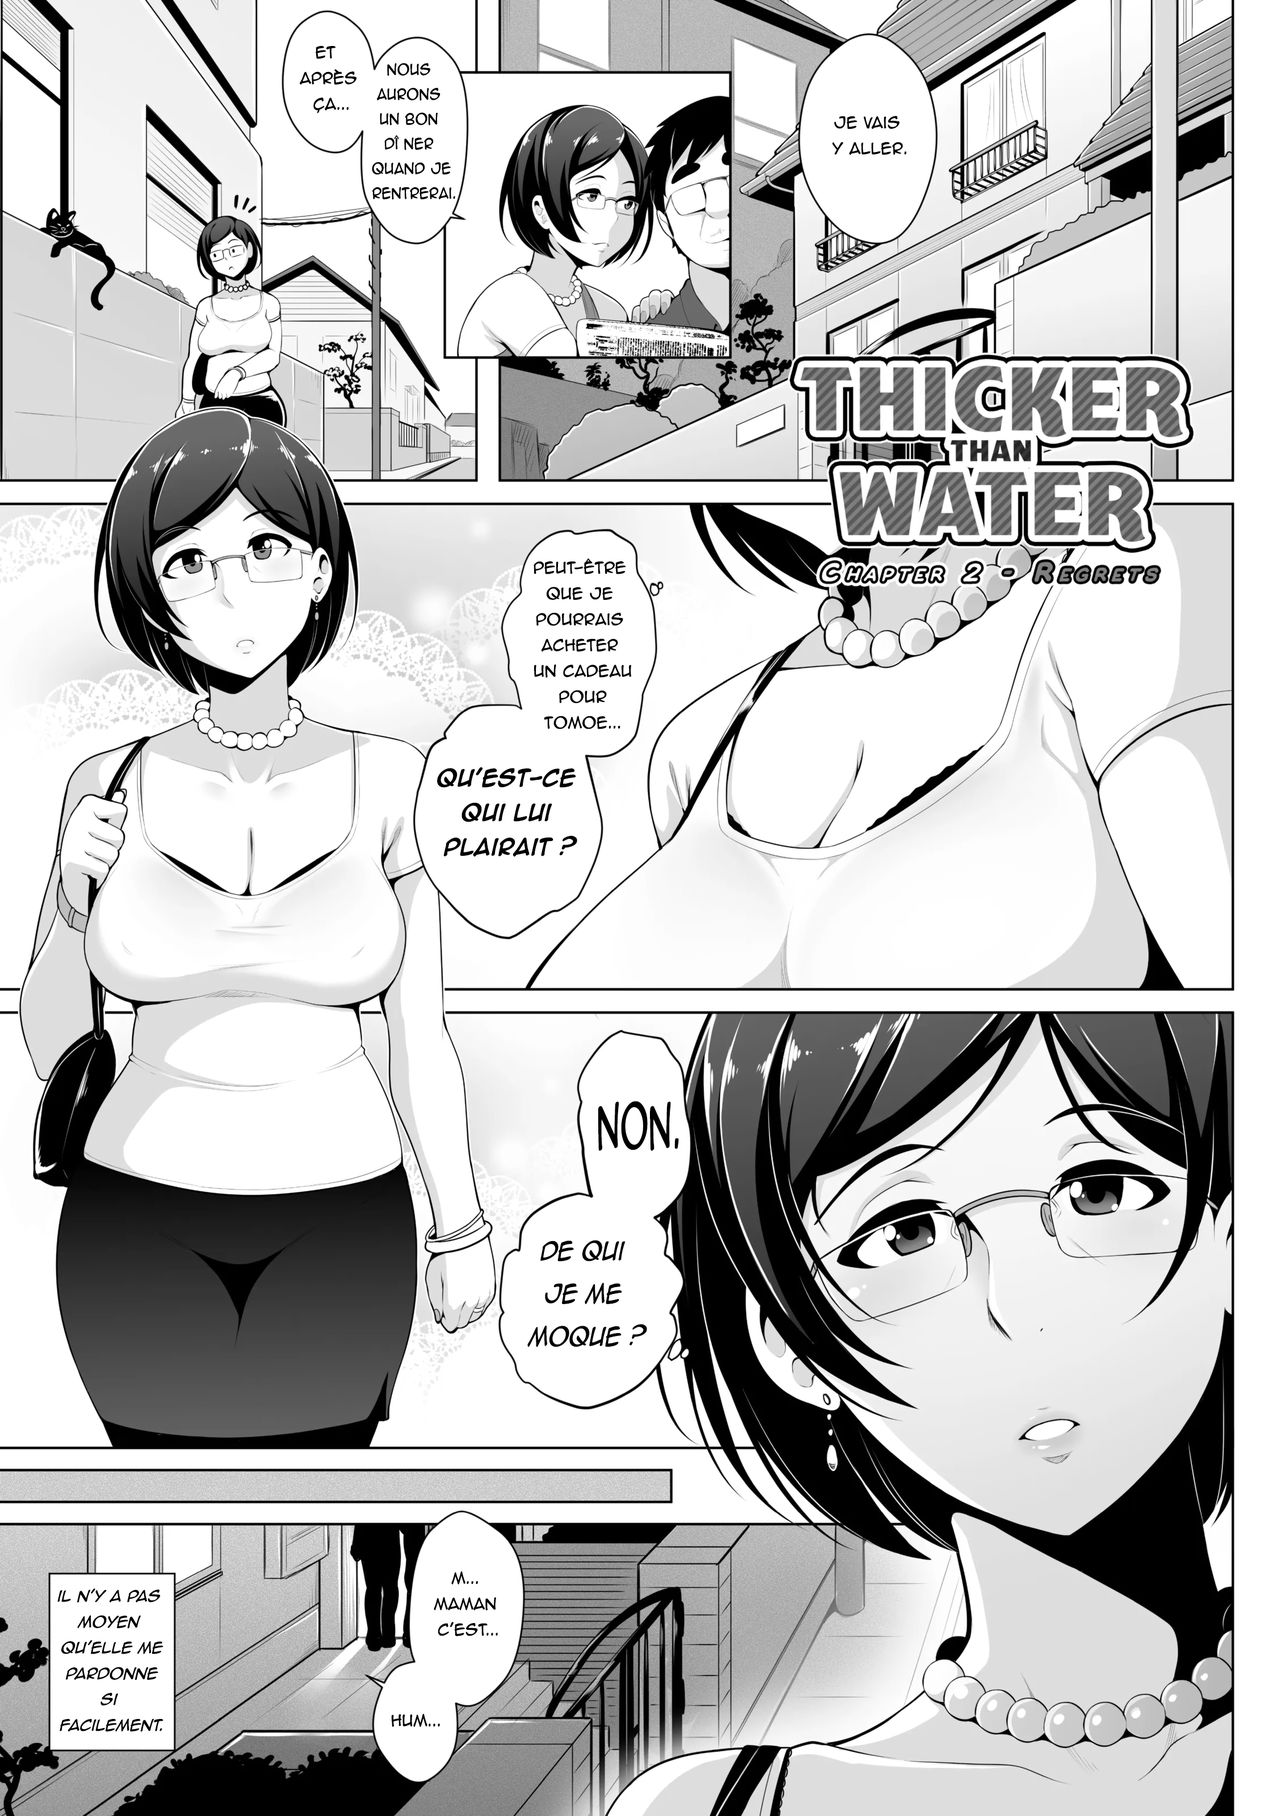 Thicker Than Water- chap 01-02 numero d'image 19